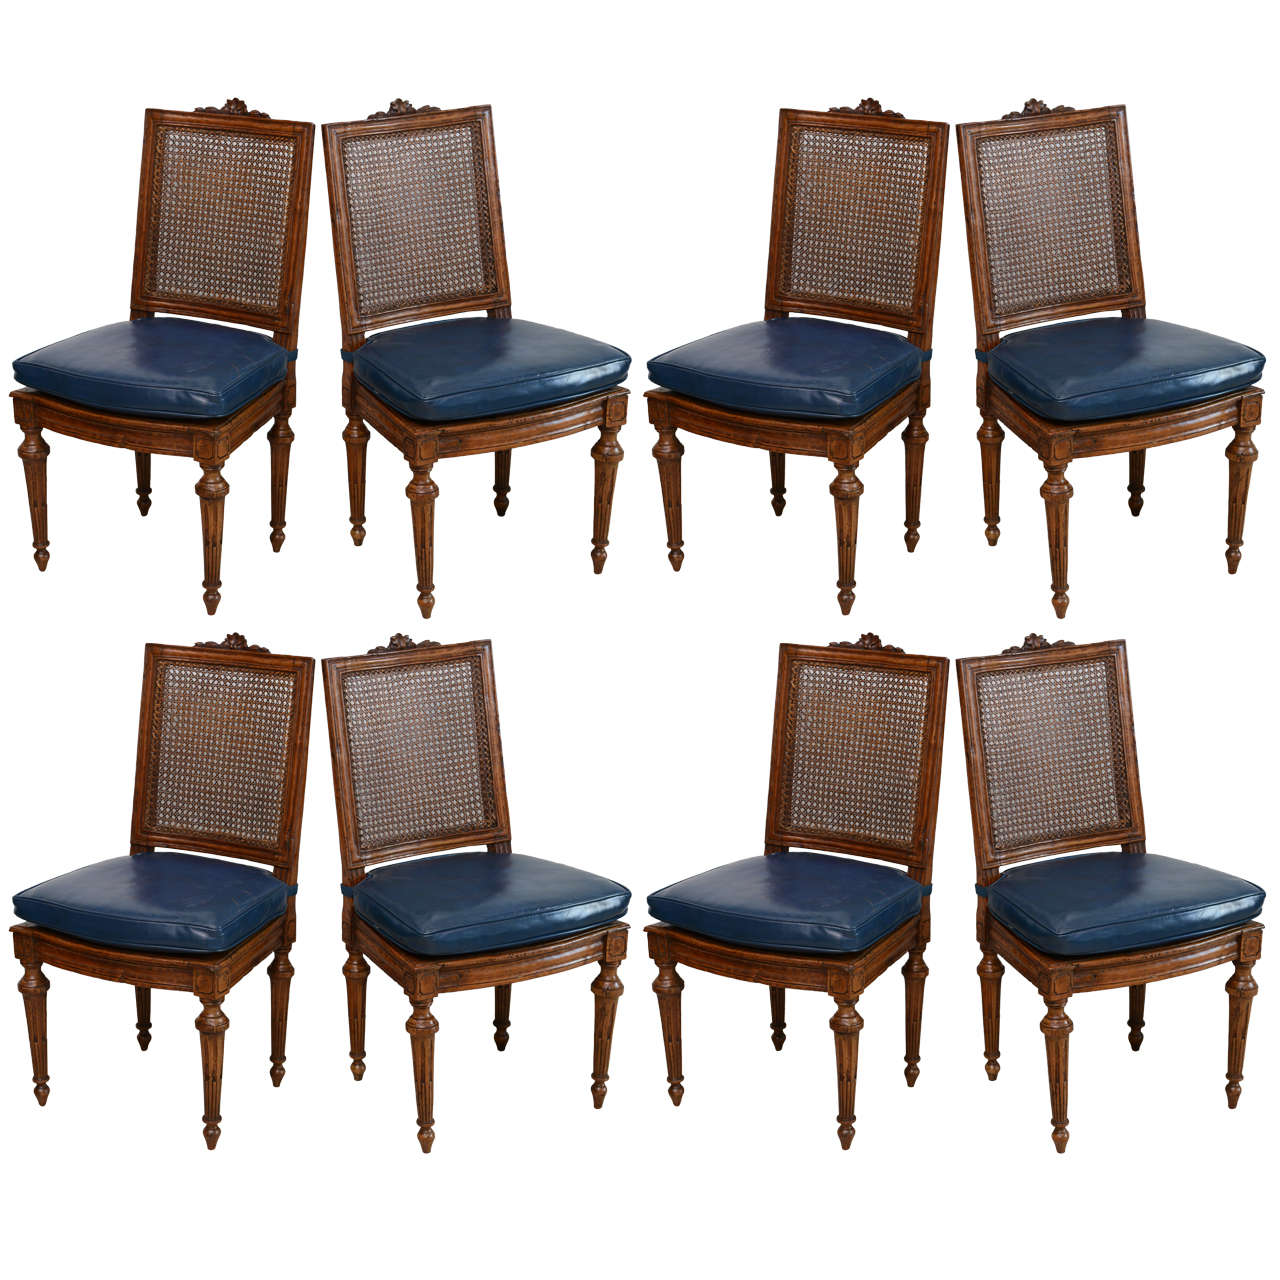 Set of Eight Louis XVI Beechwood Dining Chairs, Late 18th Century For Sale